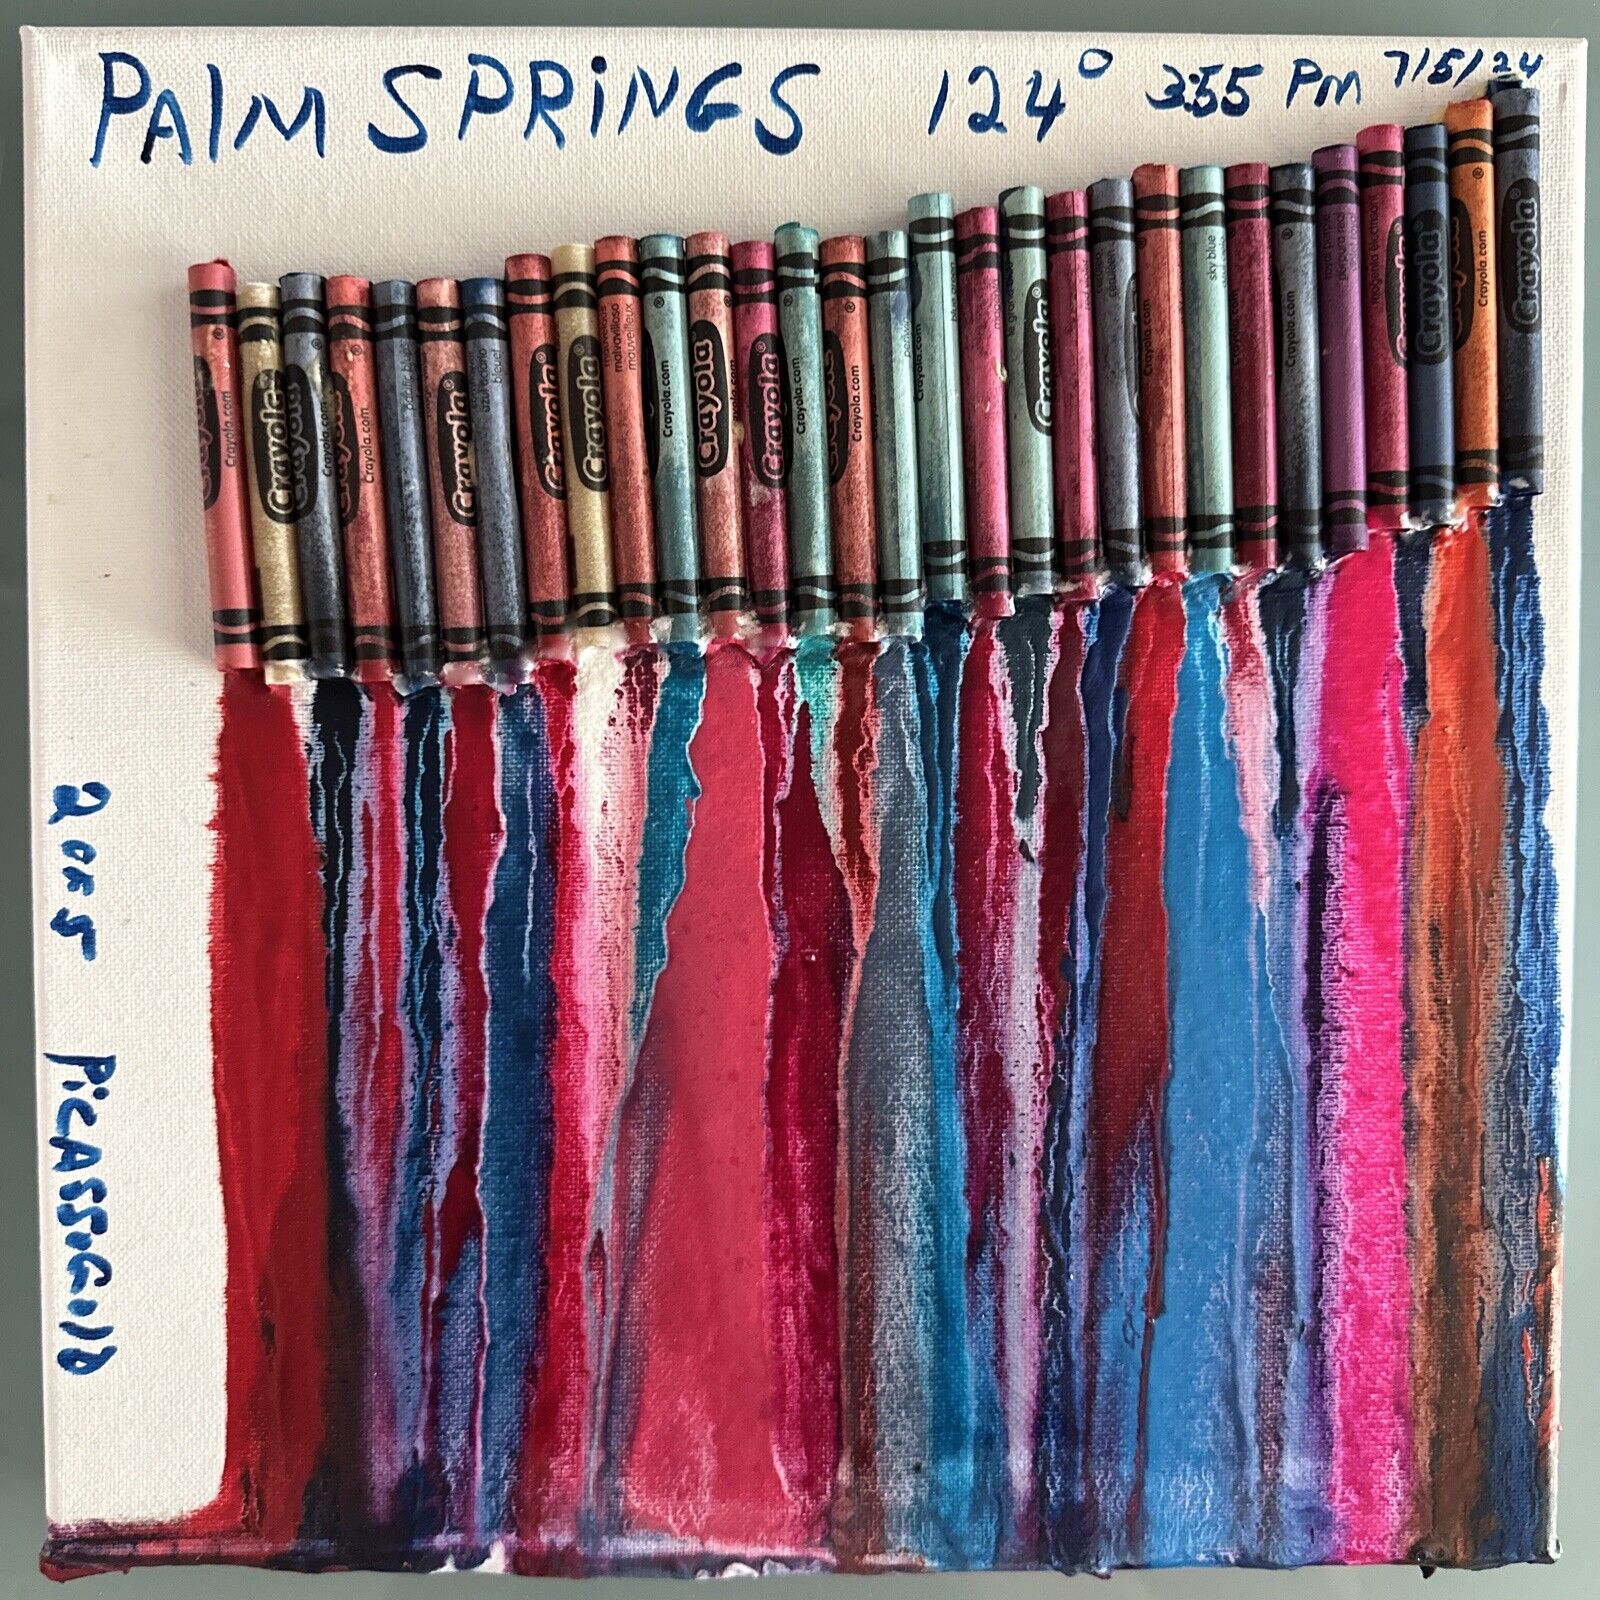 High Temp 124* 7-5-24 PALM SPRINGS Crayons Melted @3:55 PM #2 Picasso Gold Art